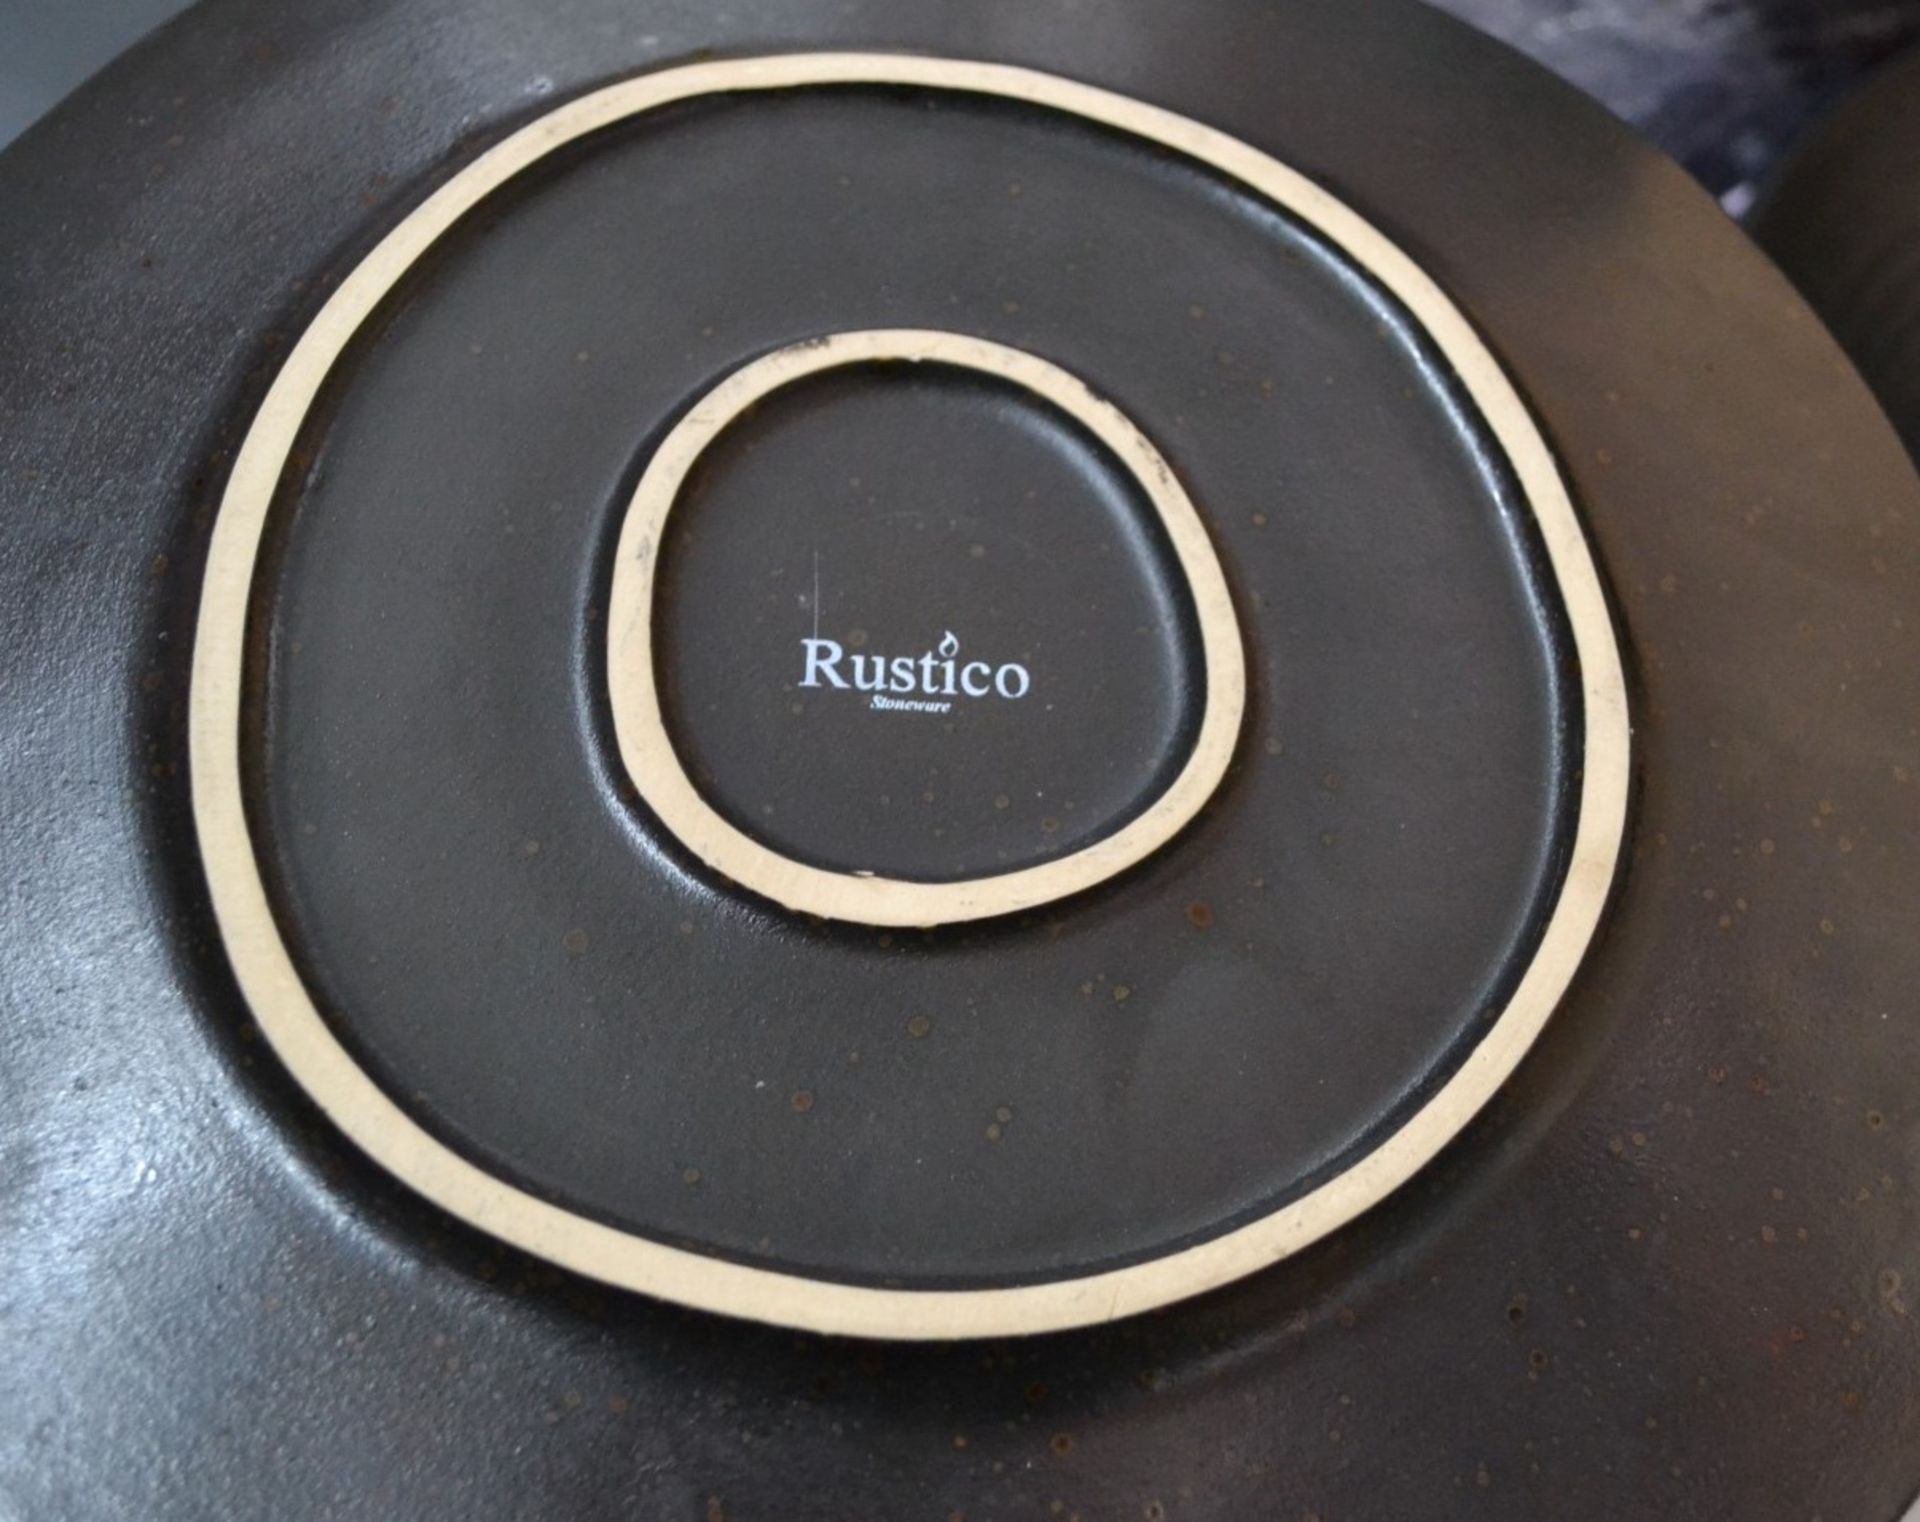 100 x Assorted Pieces of High-end Commercial Crockery In Black - Dudson Evolution / Rustio - Image 8 of 8